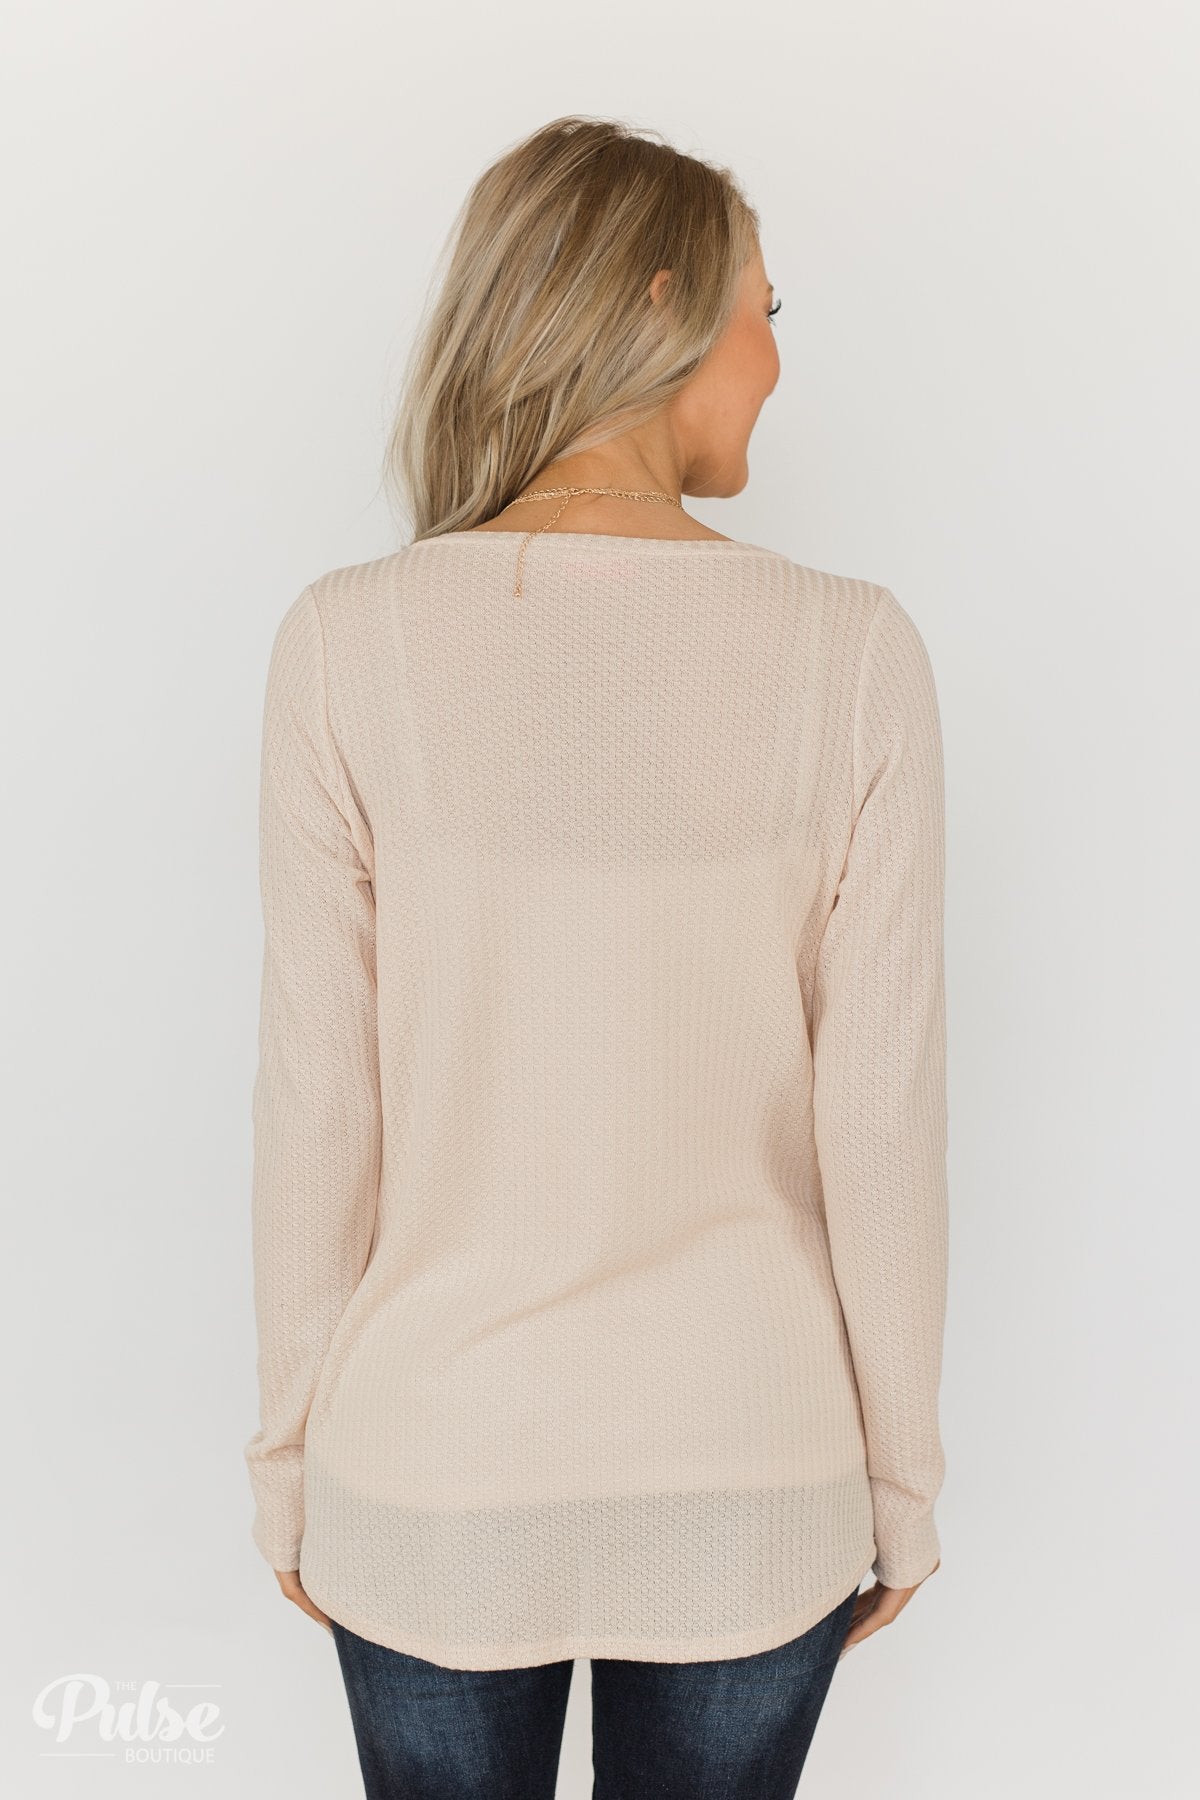 Twist of Something Special Thermal Top- Cream